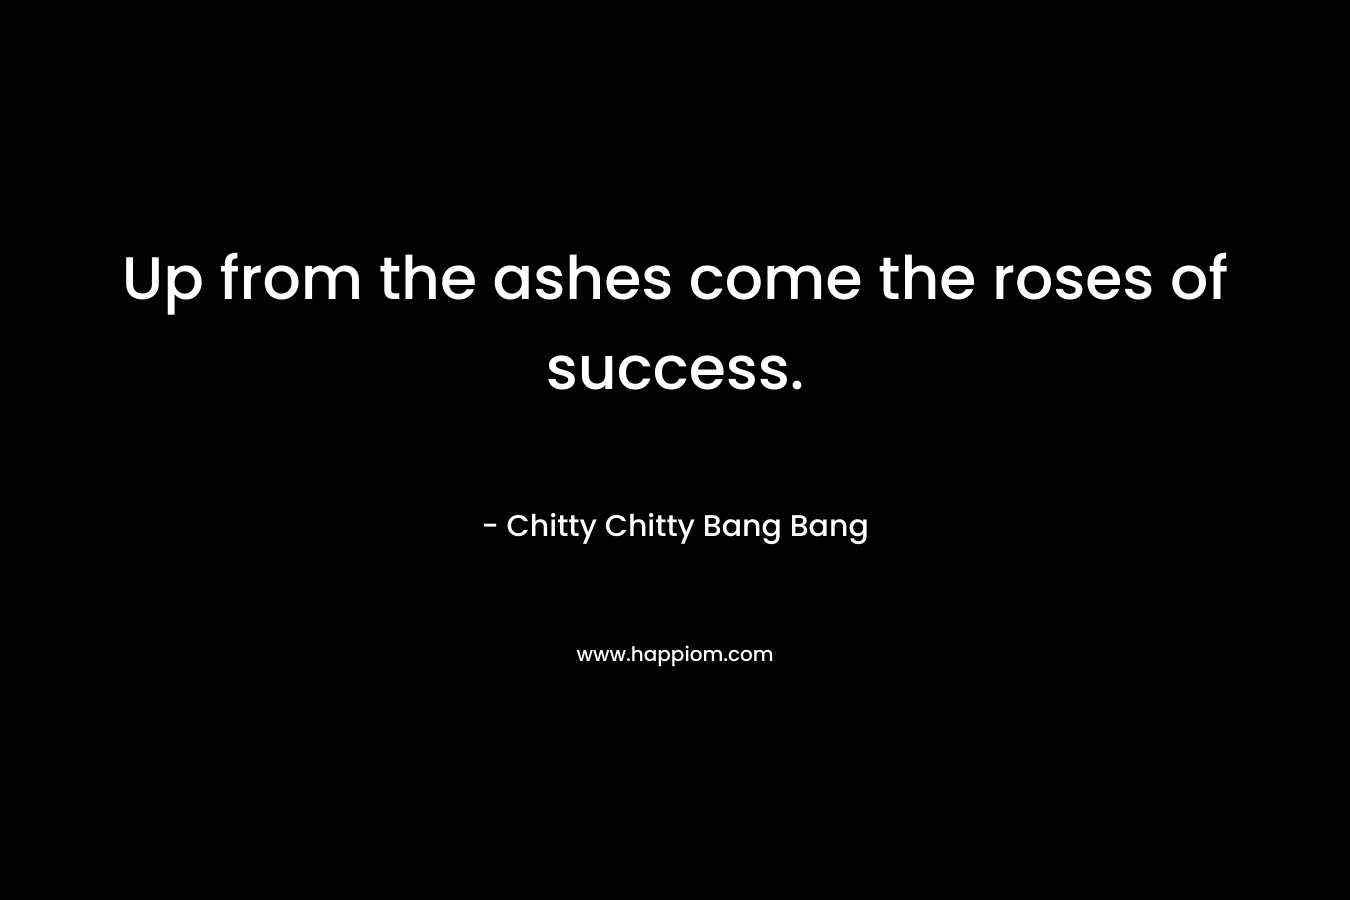 Up from the ashes come the roses of success.